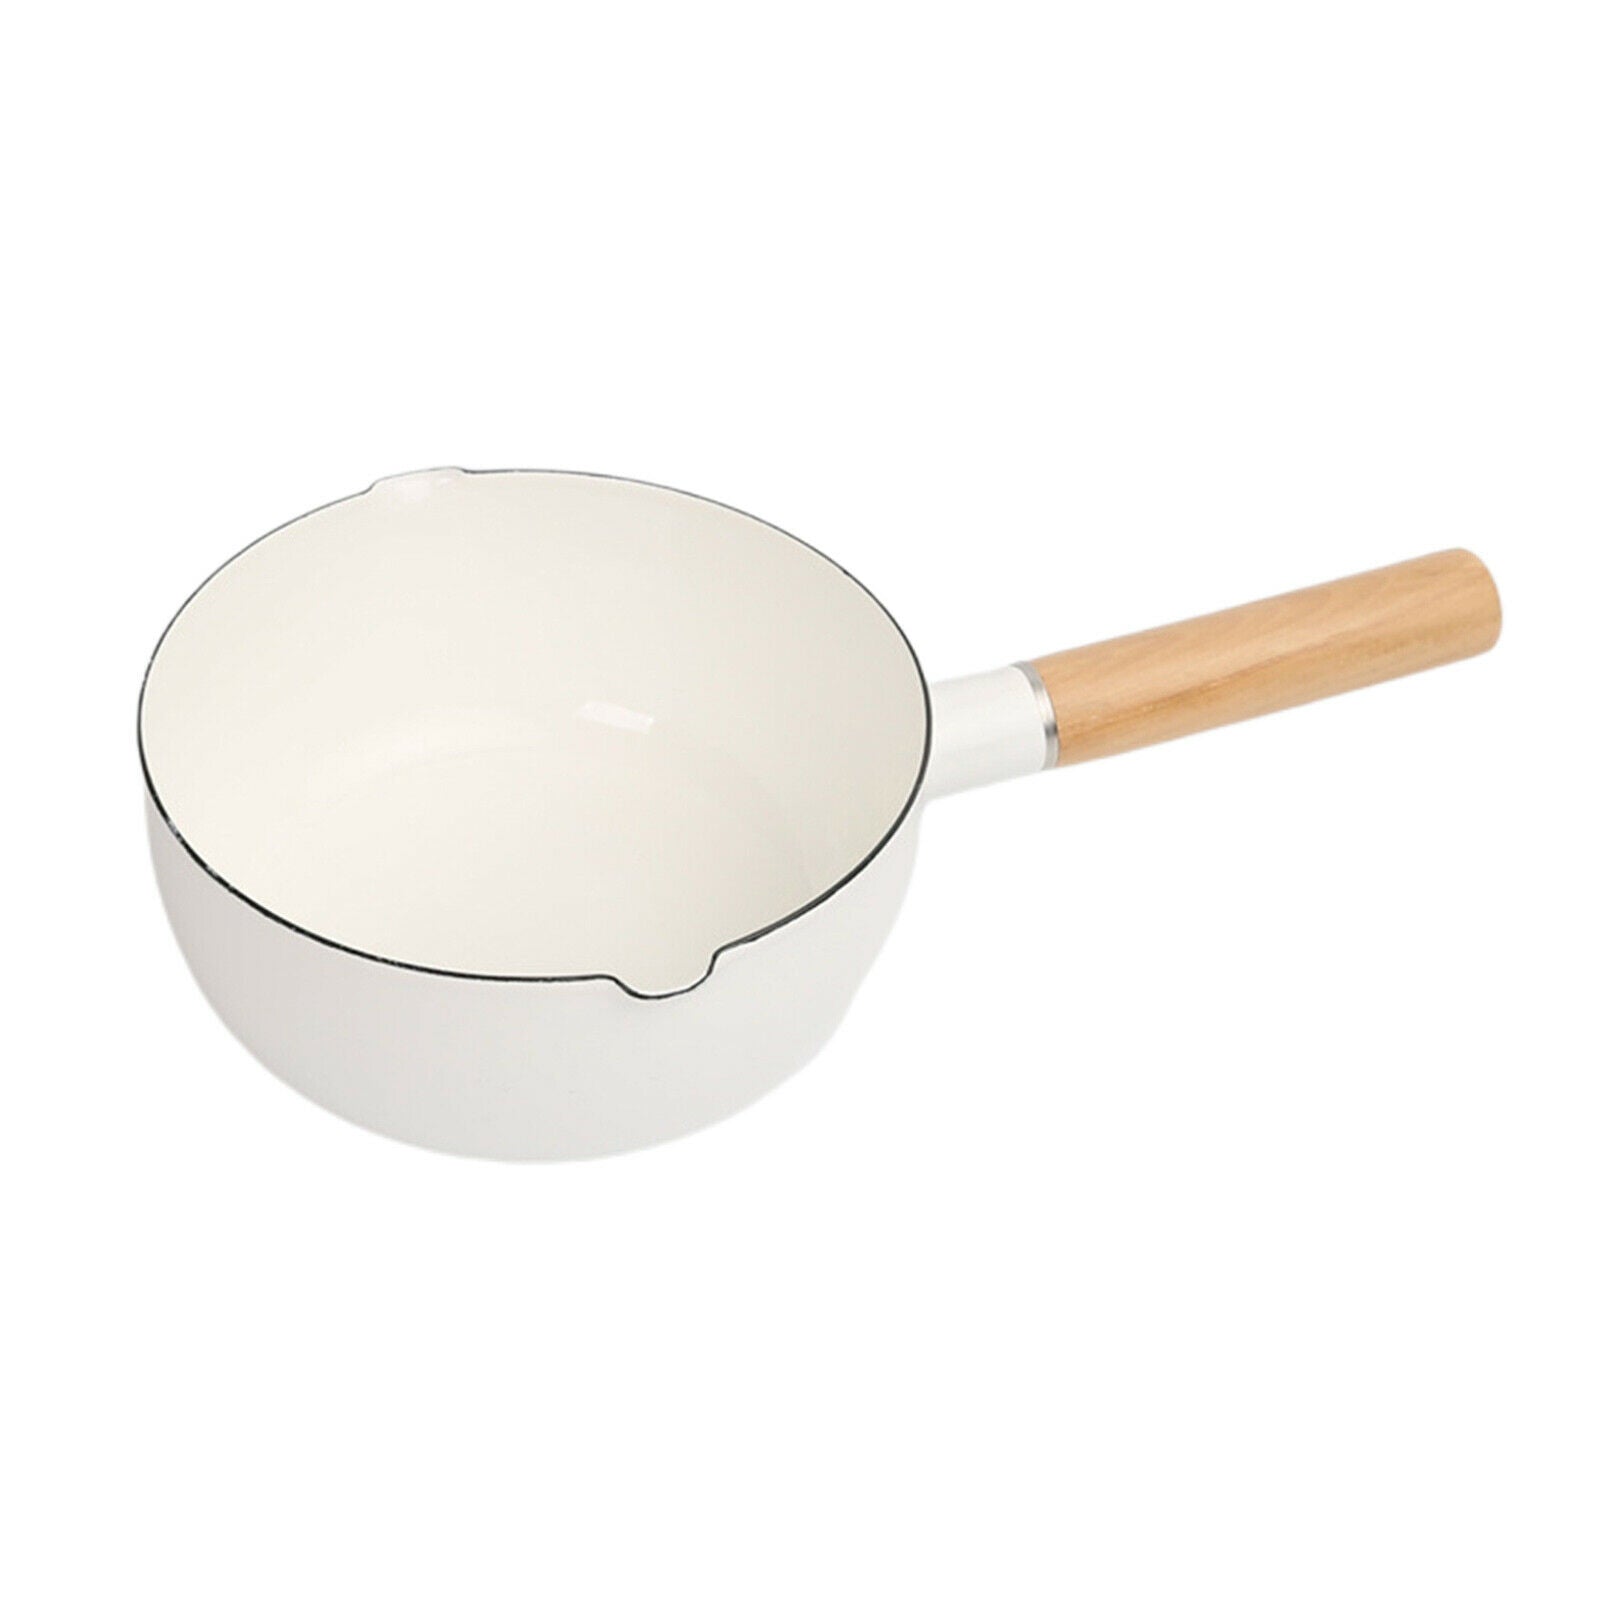 1.5L Enamel Milk Pan Cooking Pot Non-Stick Uncoated for Home Stoves All Hobs